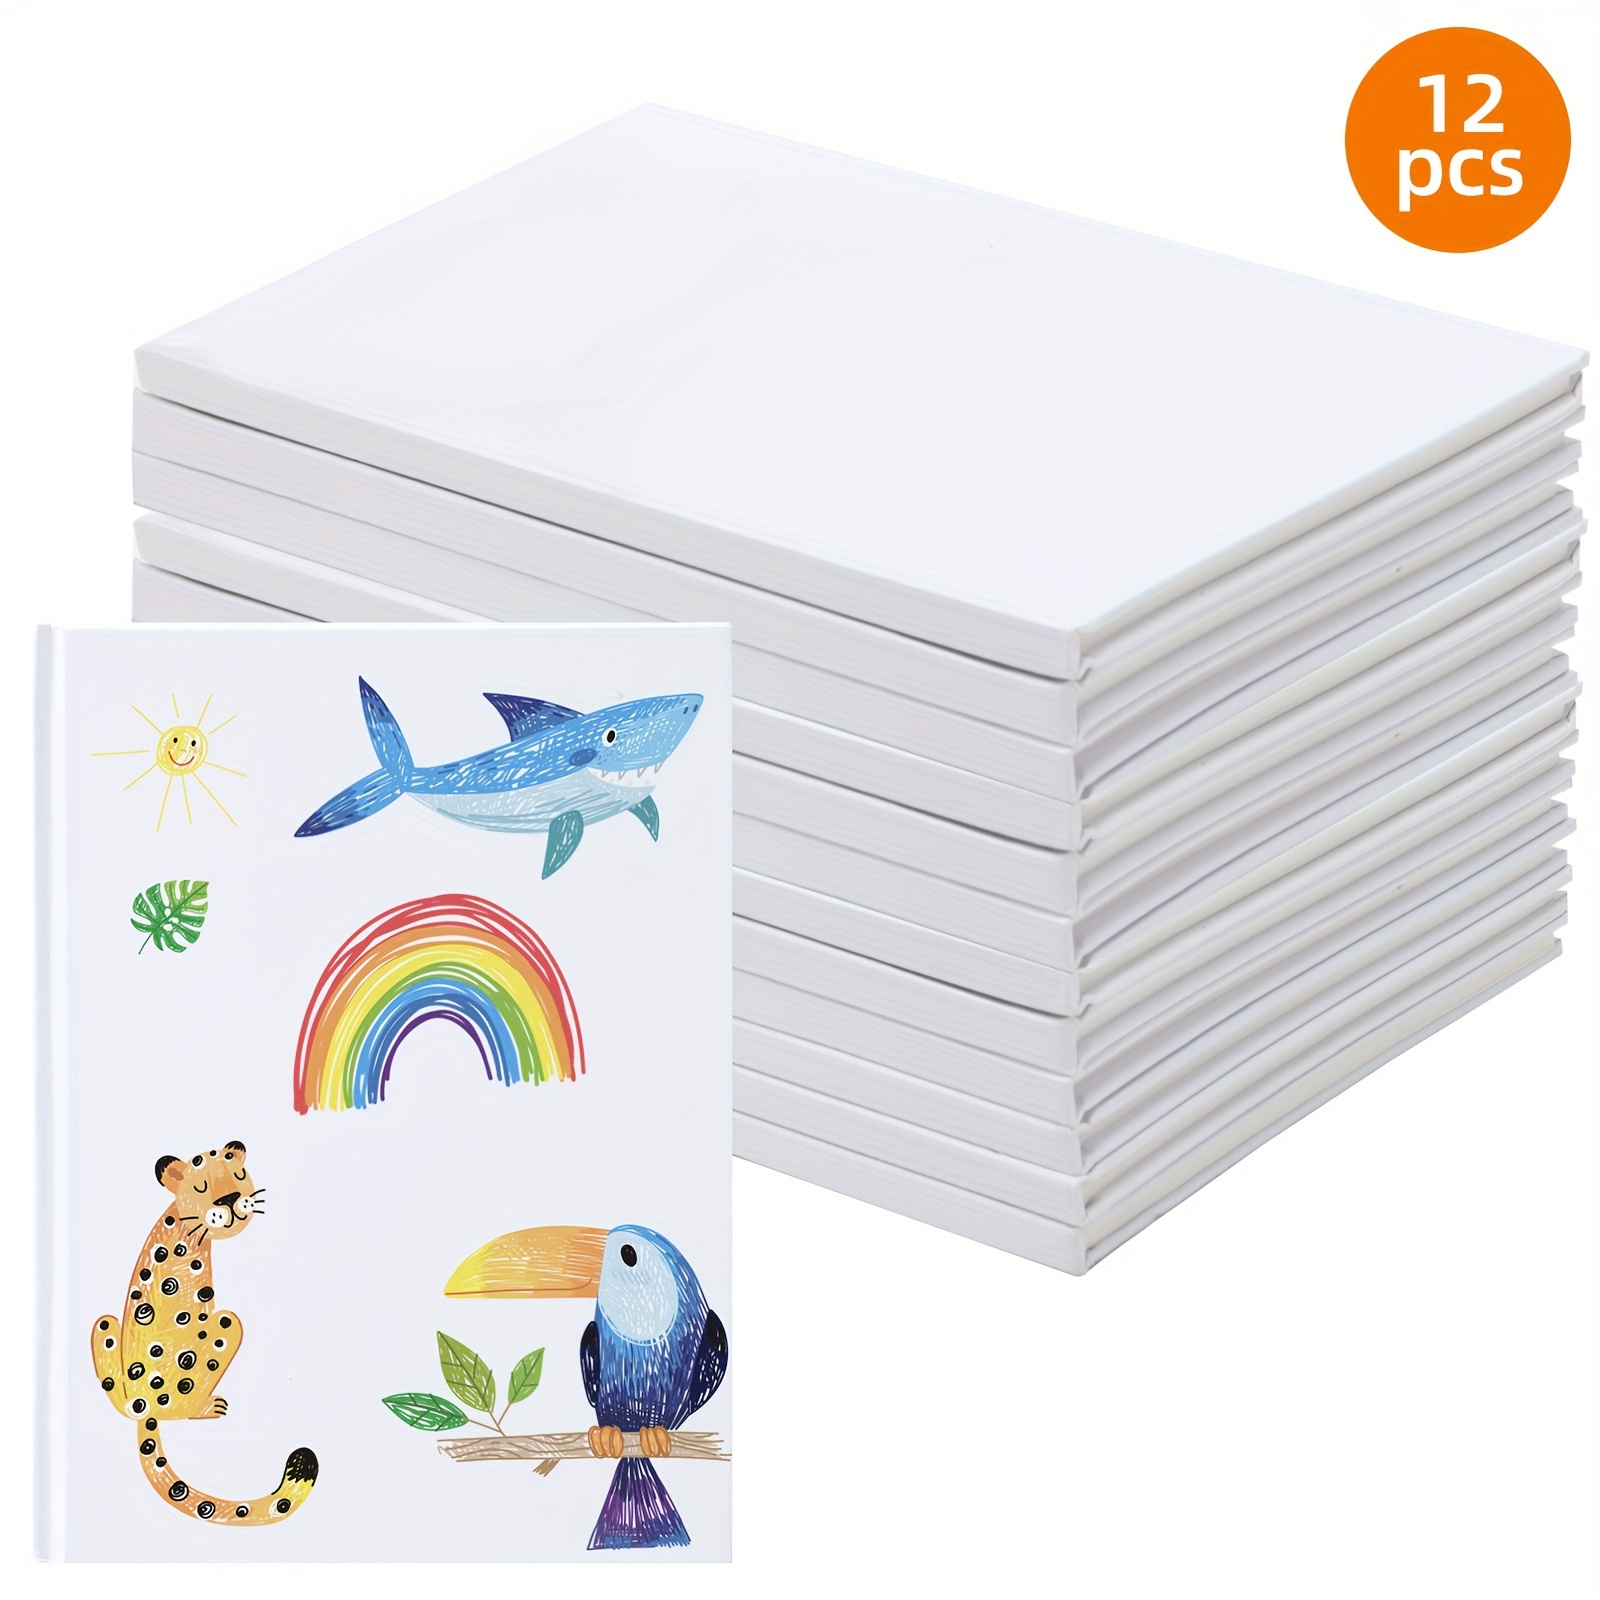 

12 Pack White Hardcover Blank Book, 40 Pages Hardcover Blank Book To Write Stories Draw Sketch, Unlined Thick Perforated Pages, 6x8 Inch